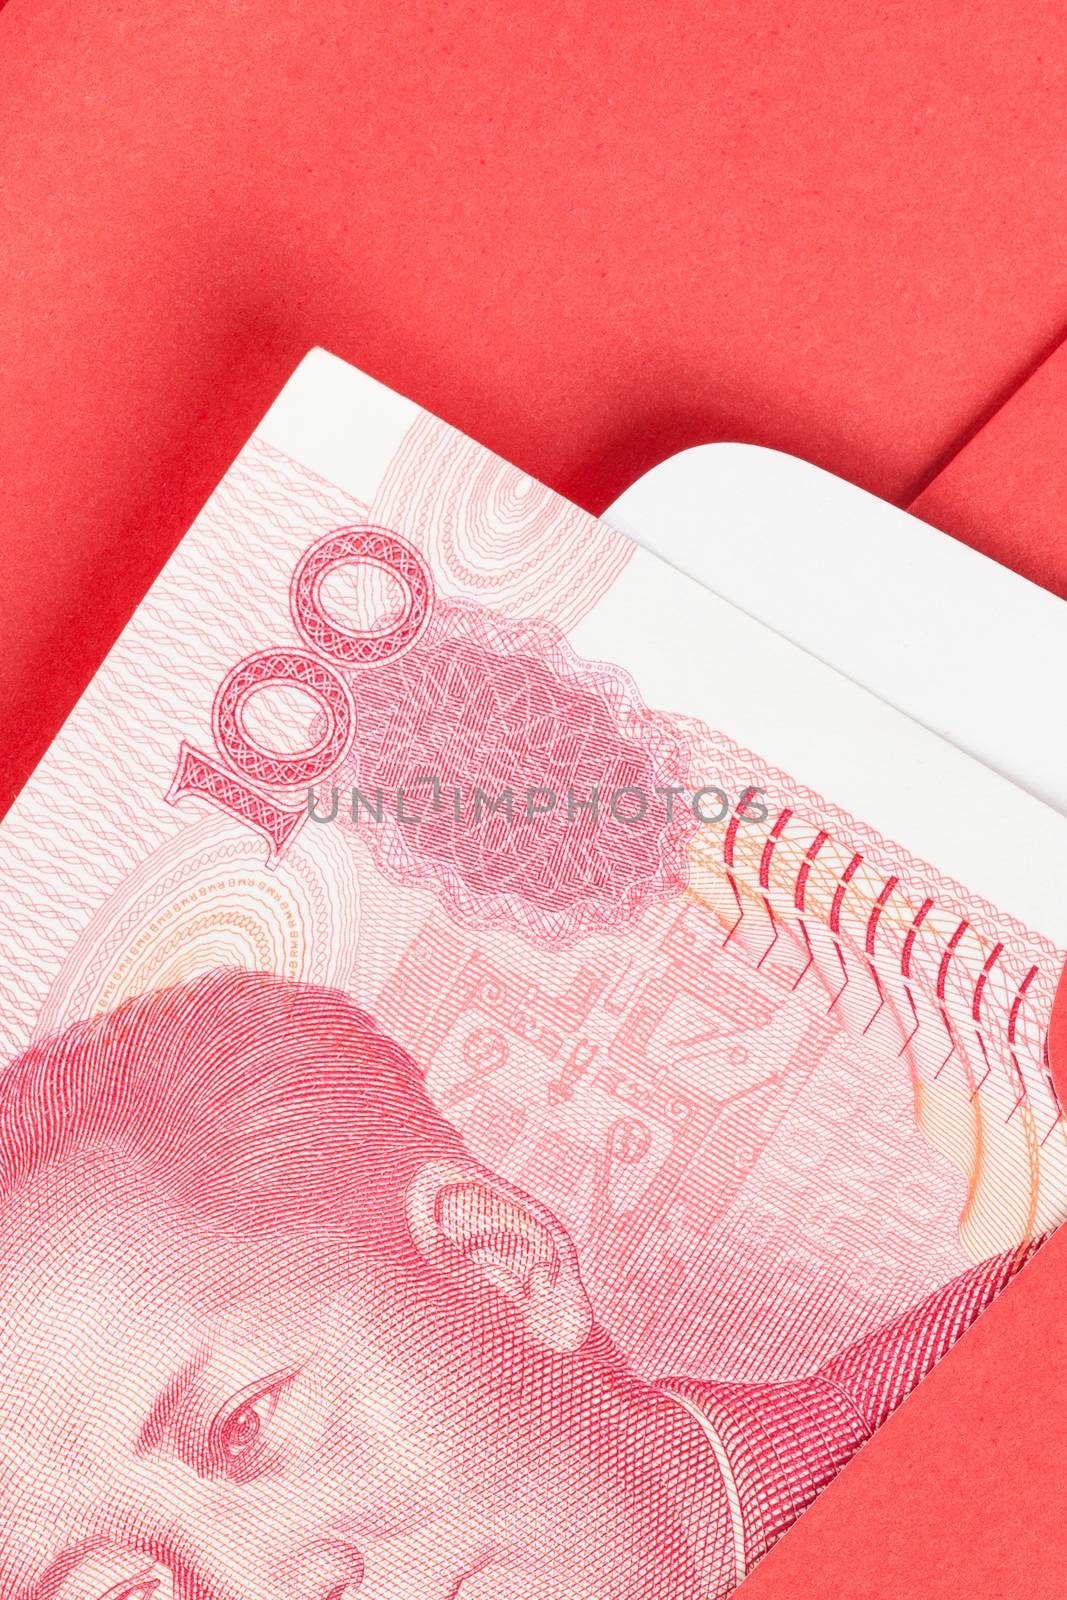 Chinese or 100 Yuan banknotes money in red envelope, as chinese  by FrameAngel